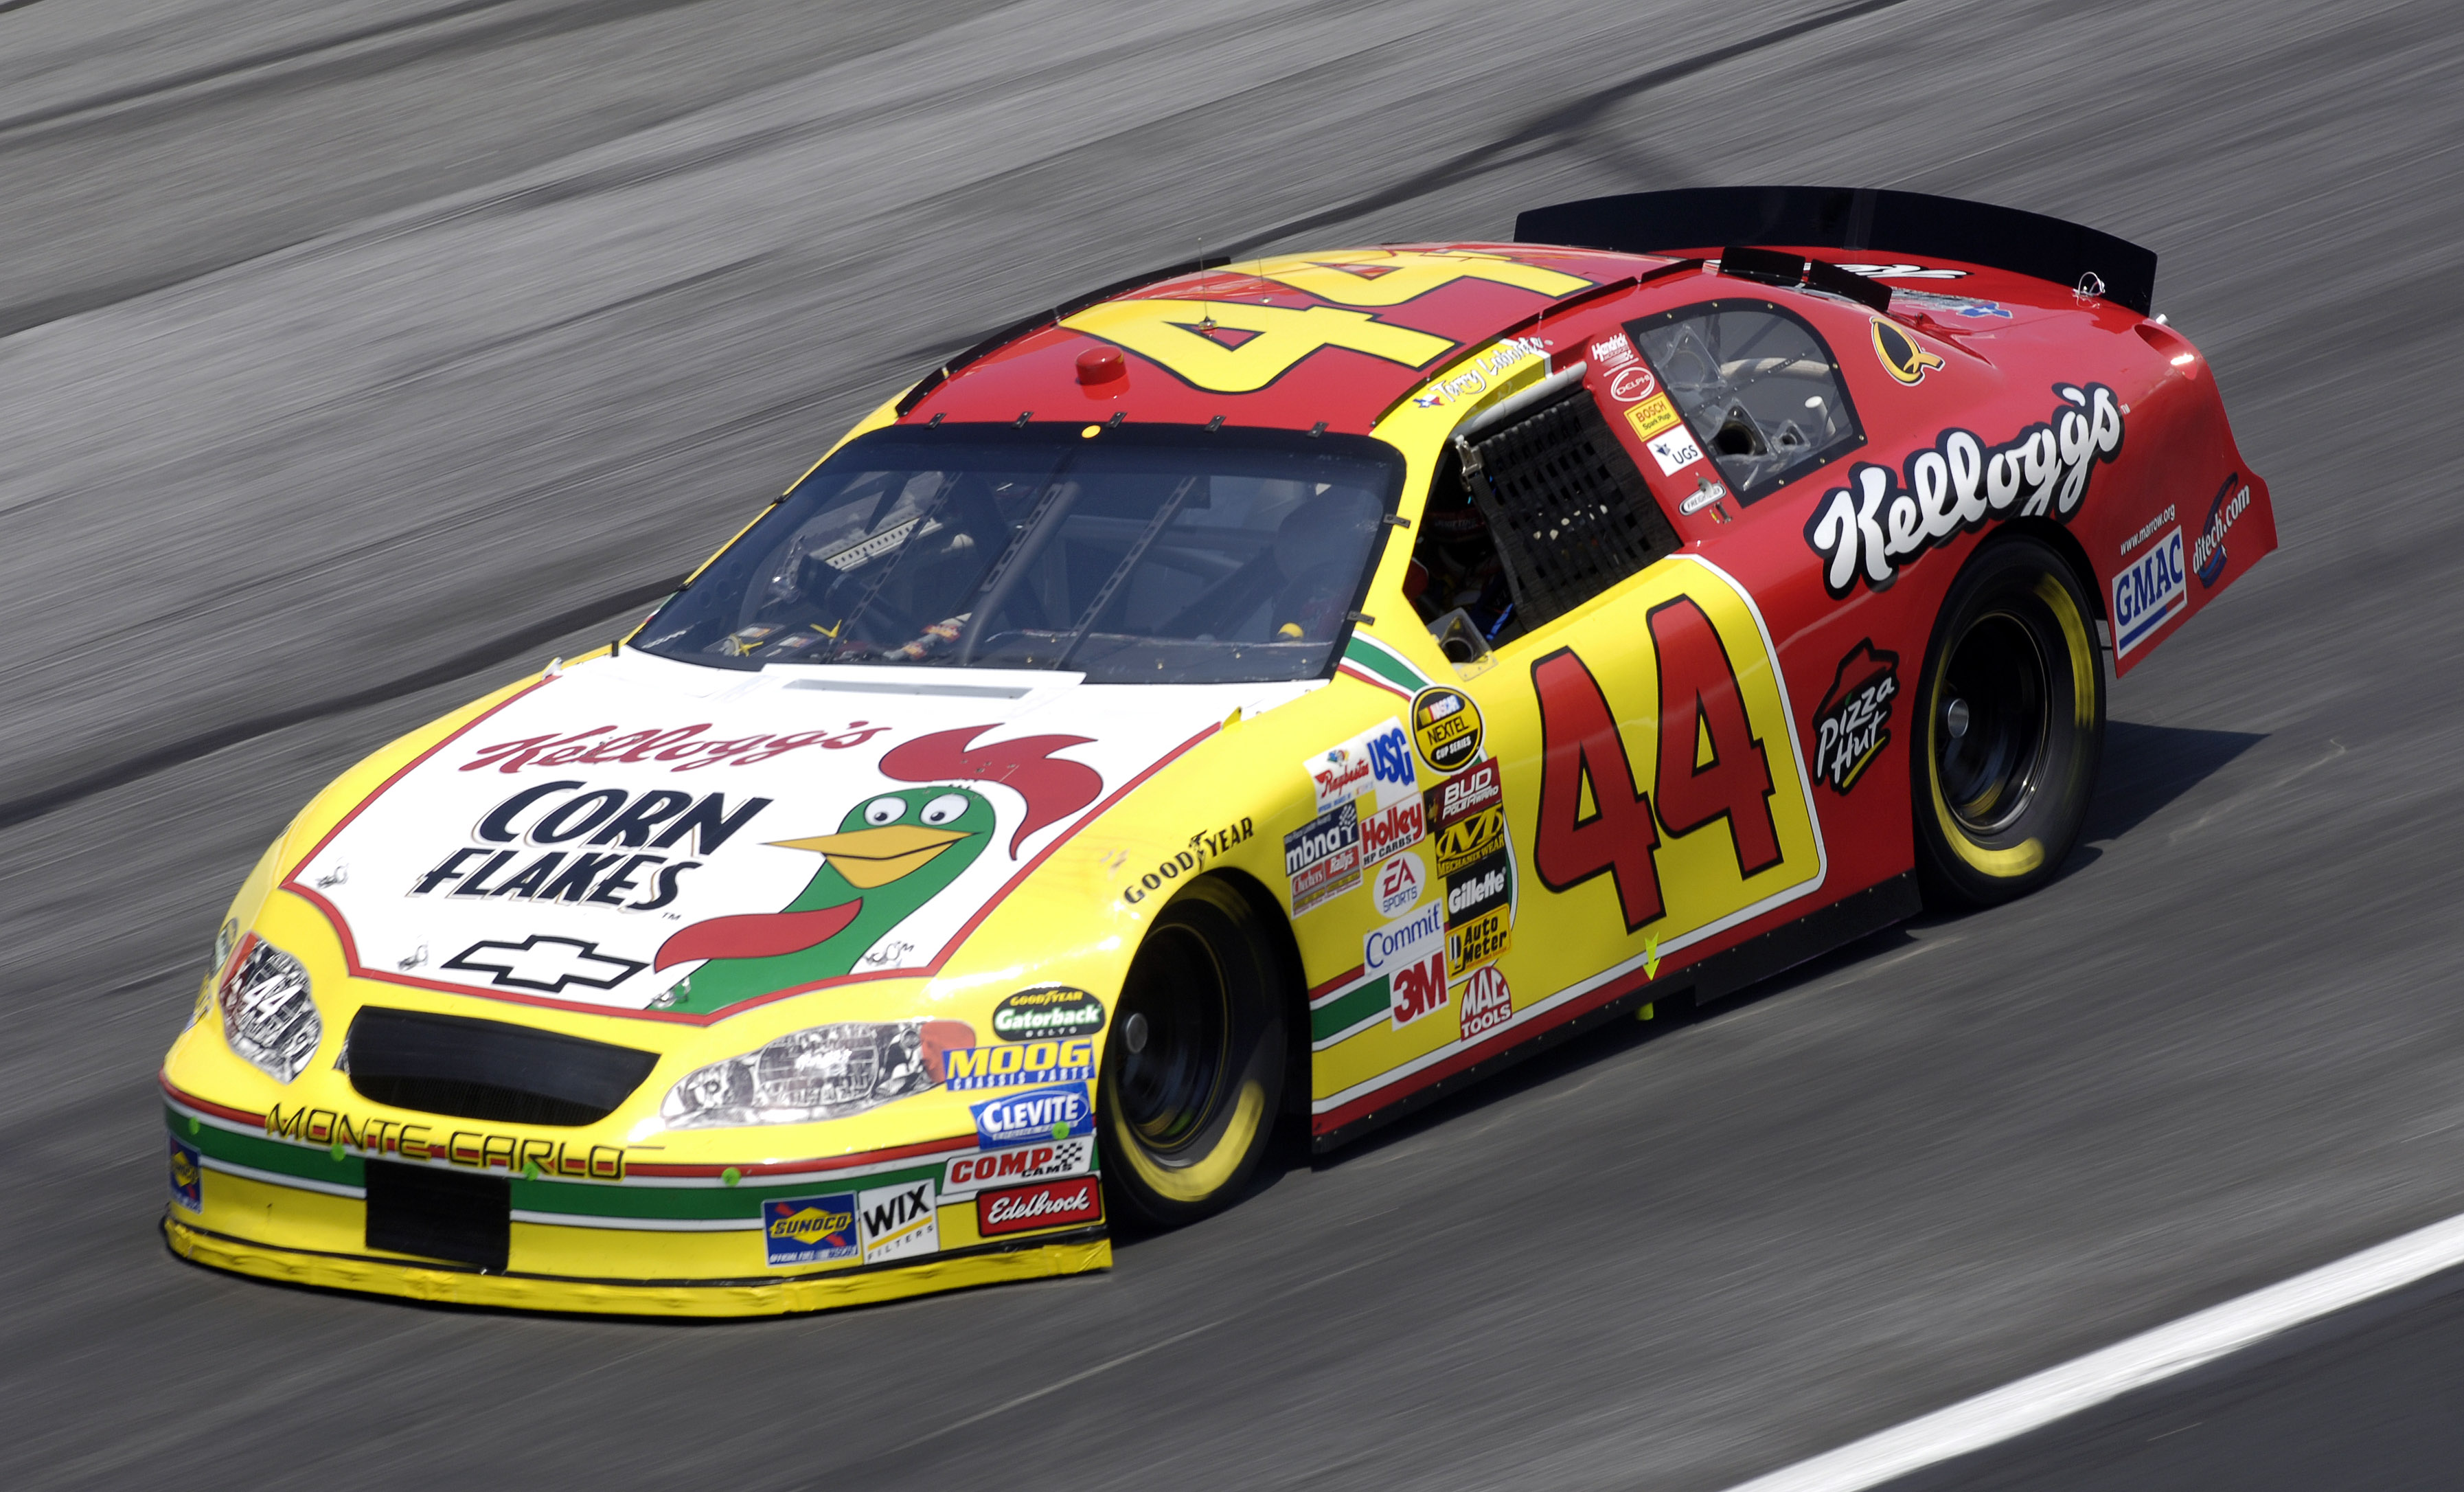 CONCORD, NC - MAY 28:  Terry Labonte drives the #44 Kellogg's Chevrolet during practice for the NASCAR Nextel Cup Series Coca-Cola 600 on May 28, 2005 at the Lowe's Motor Speedway in Concord, North Carolina.  (Photo by Rusty Jarrett/Getty Images)